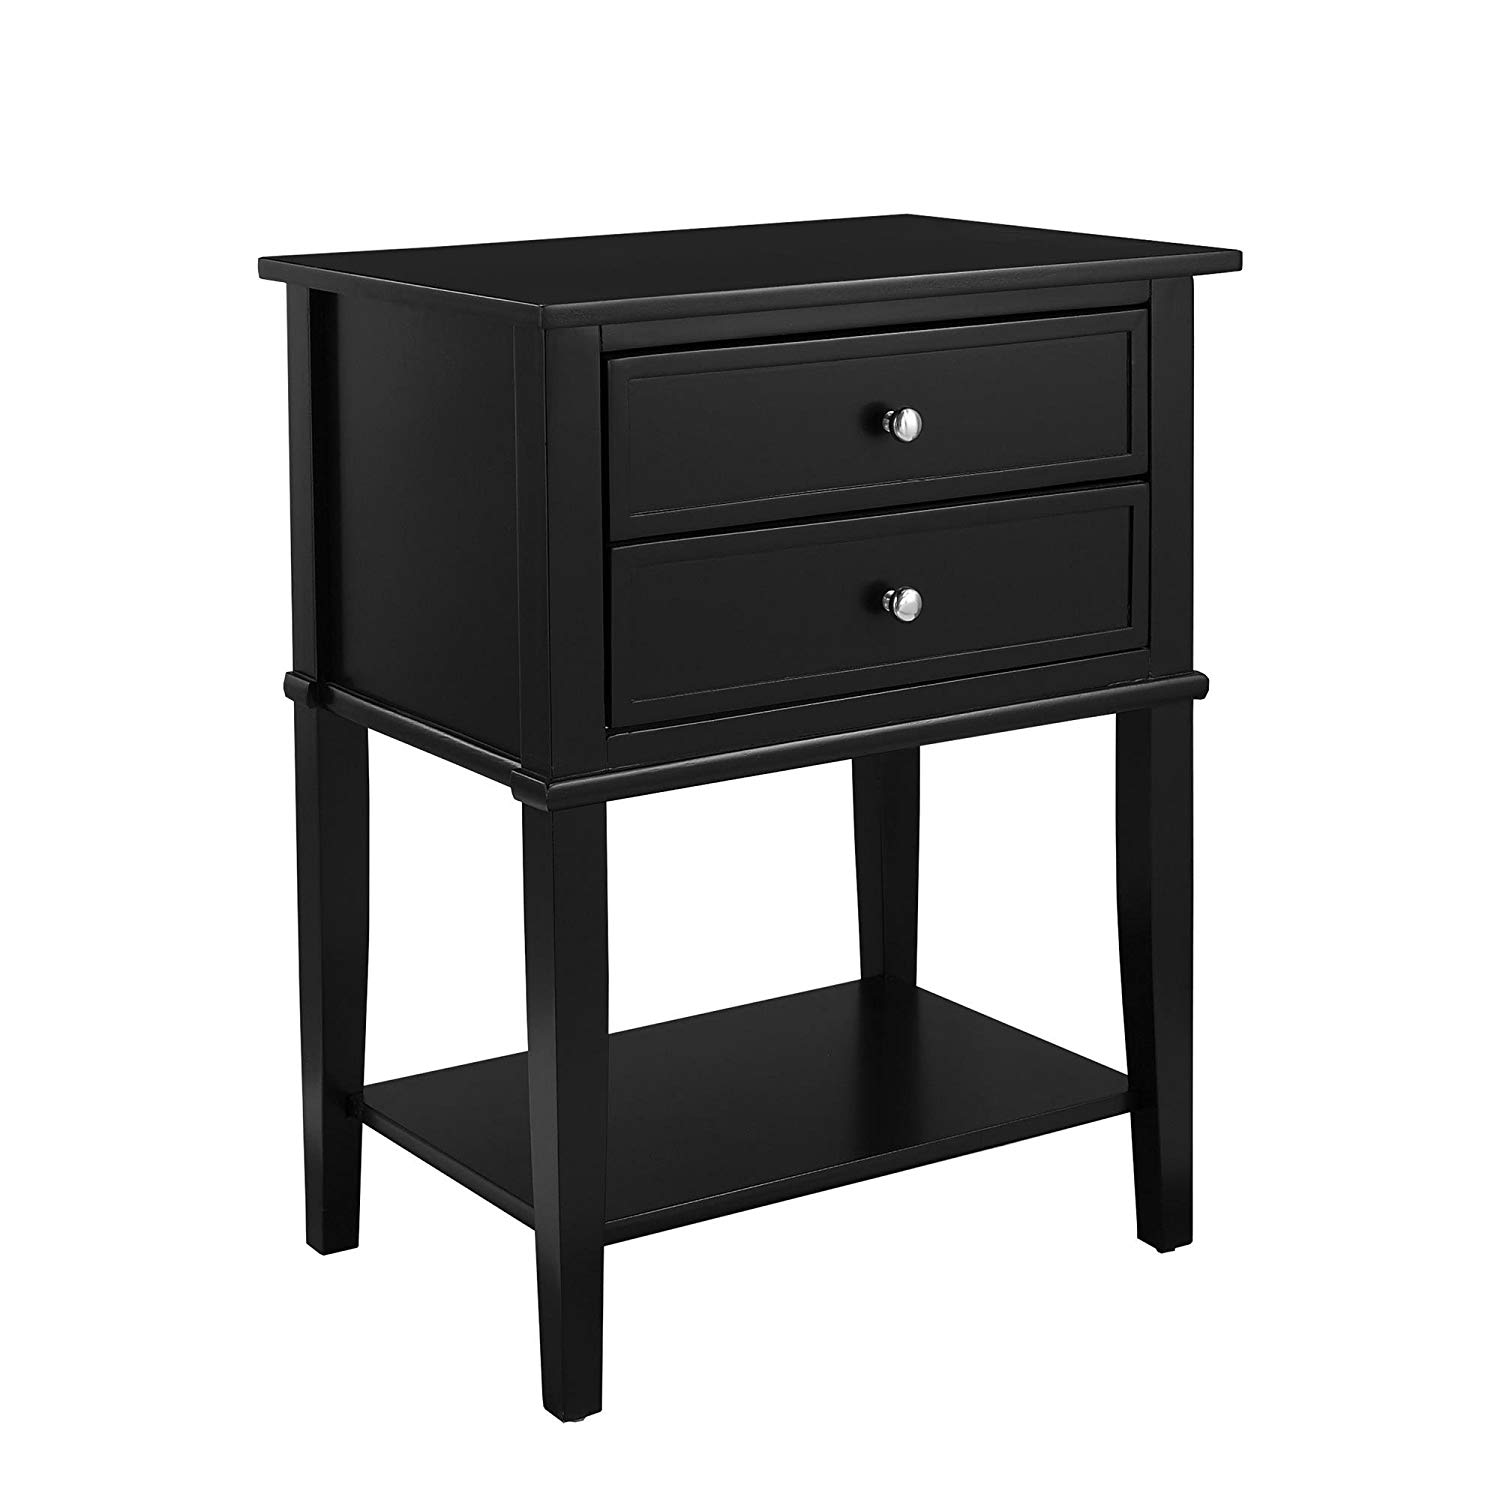 ameriwood home franklin accent table winsome instructions drawers black kitchen dining outdoor cooler kmart coffee half moon end leather living room sets tiffany desk lamp all